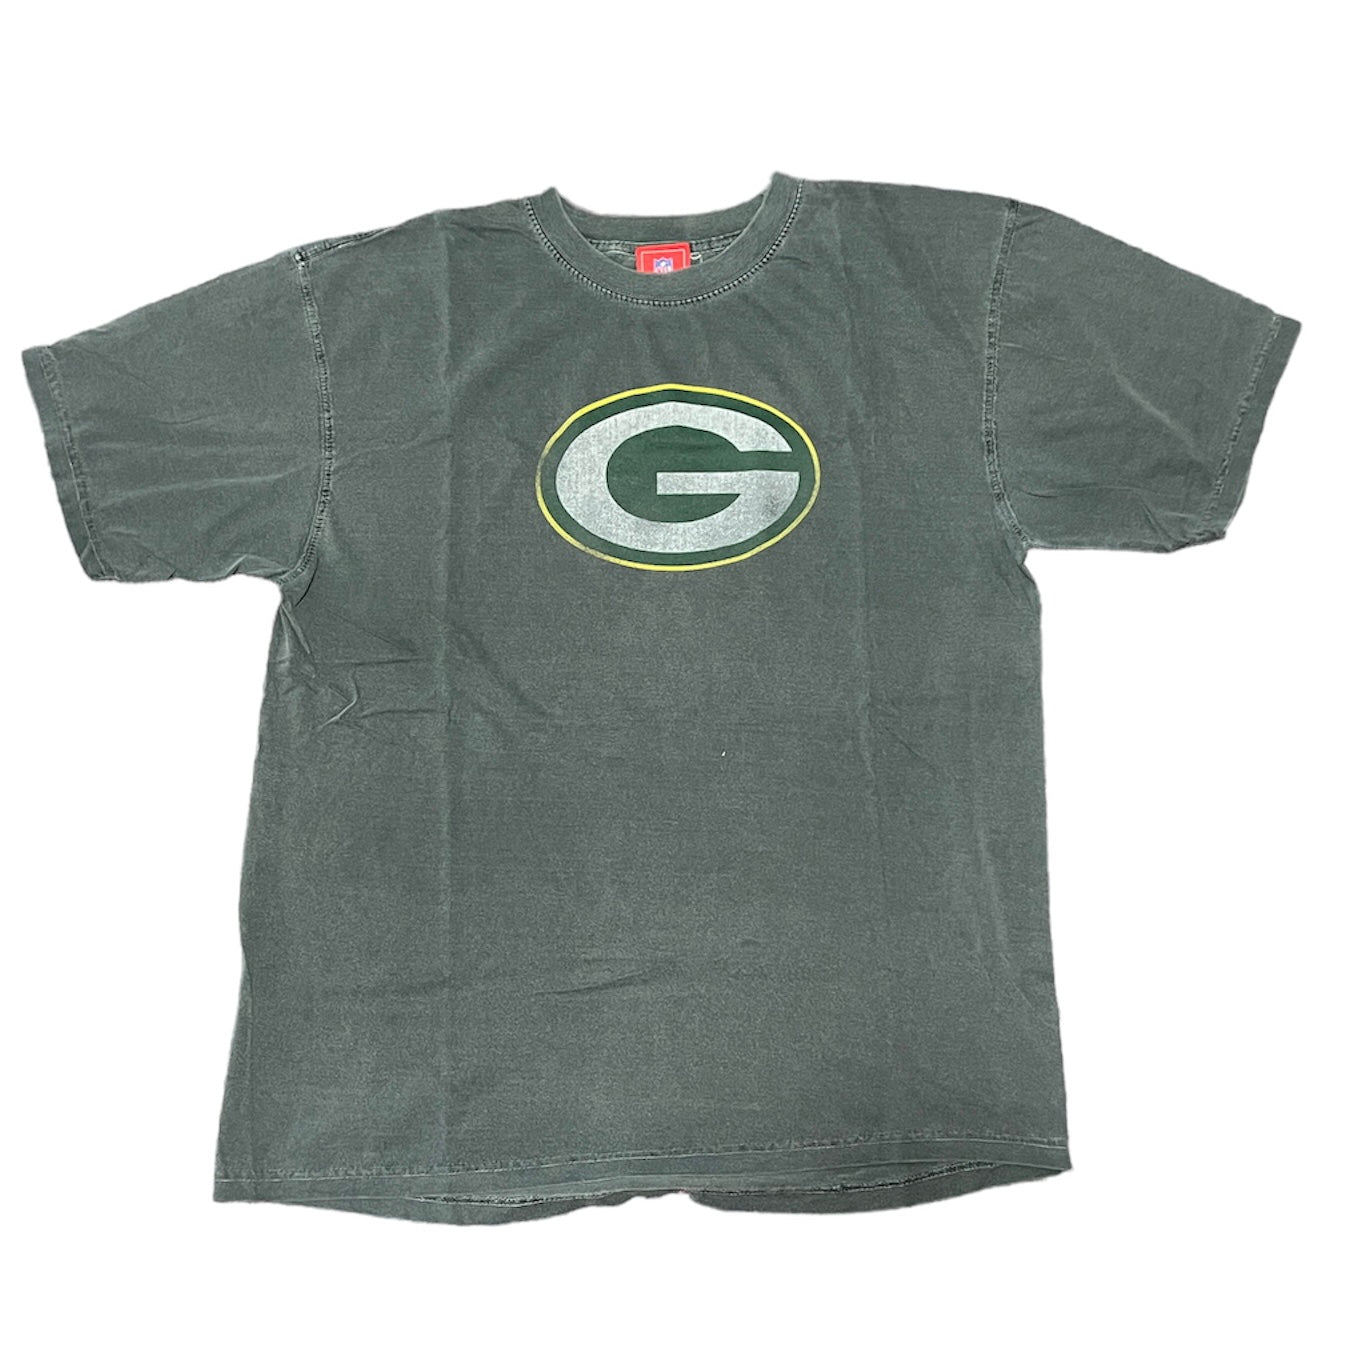 Green Bay Packers T-Shirt Size Large